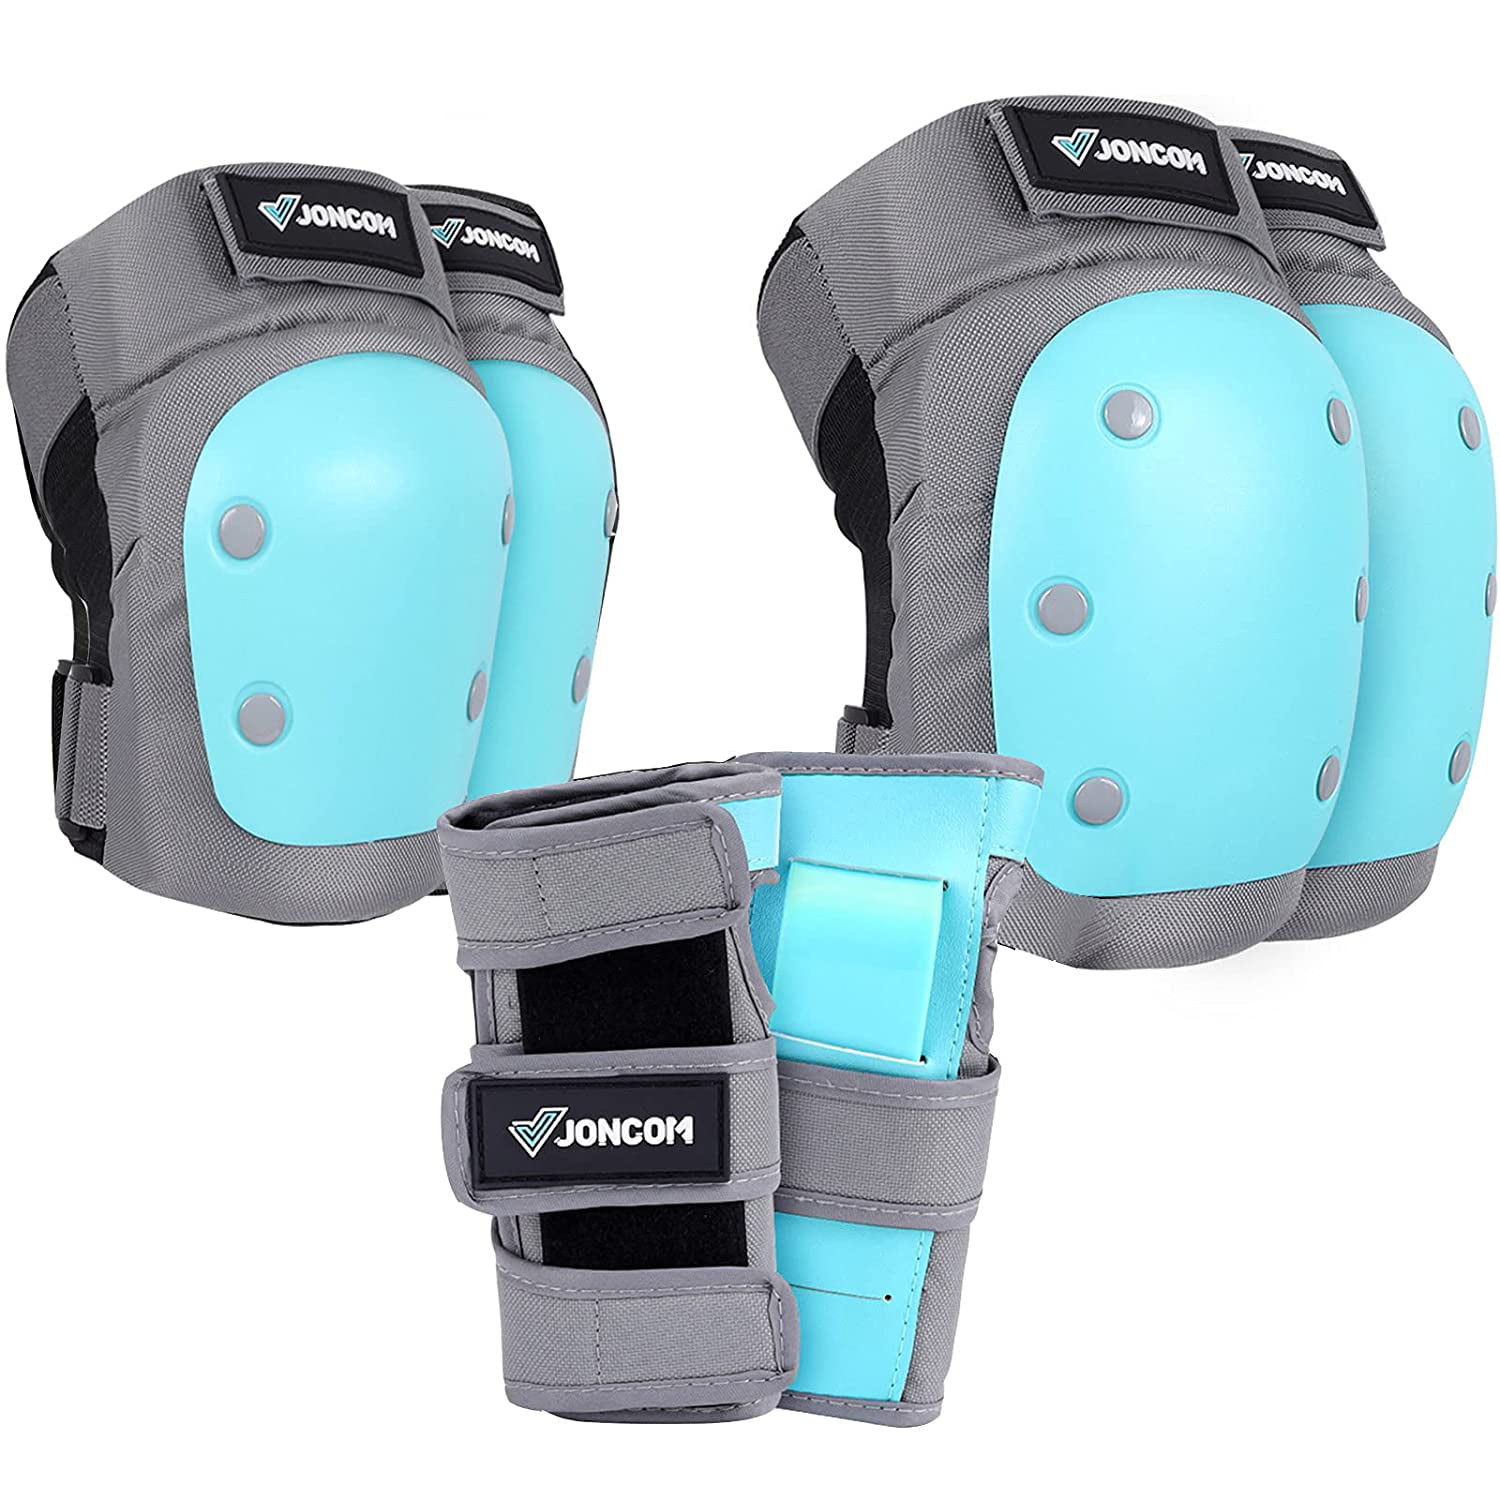 Rollerblading Snowboarding Roller Skating Cycling Joncom Knee Pads Elbow Pads Wrist Guards for Kids Youth Adult 3 in 1 Protective Gear Set for Skateboarding